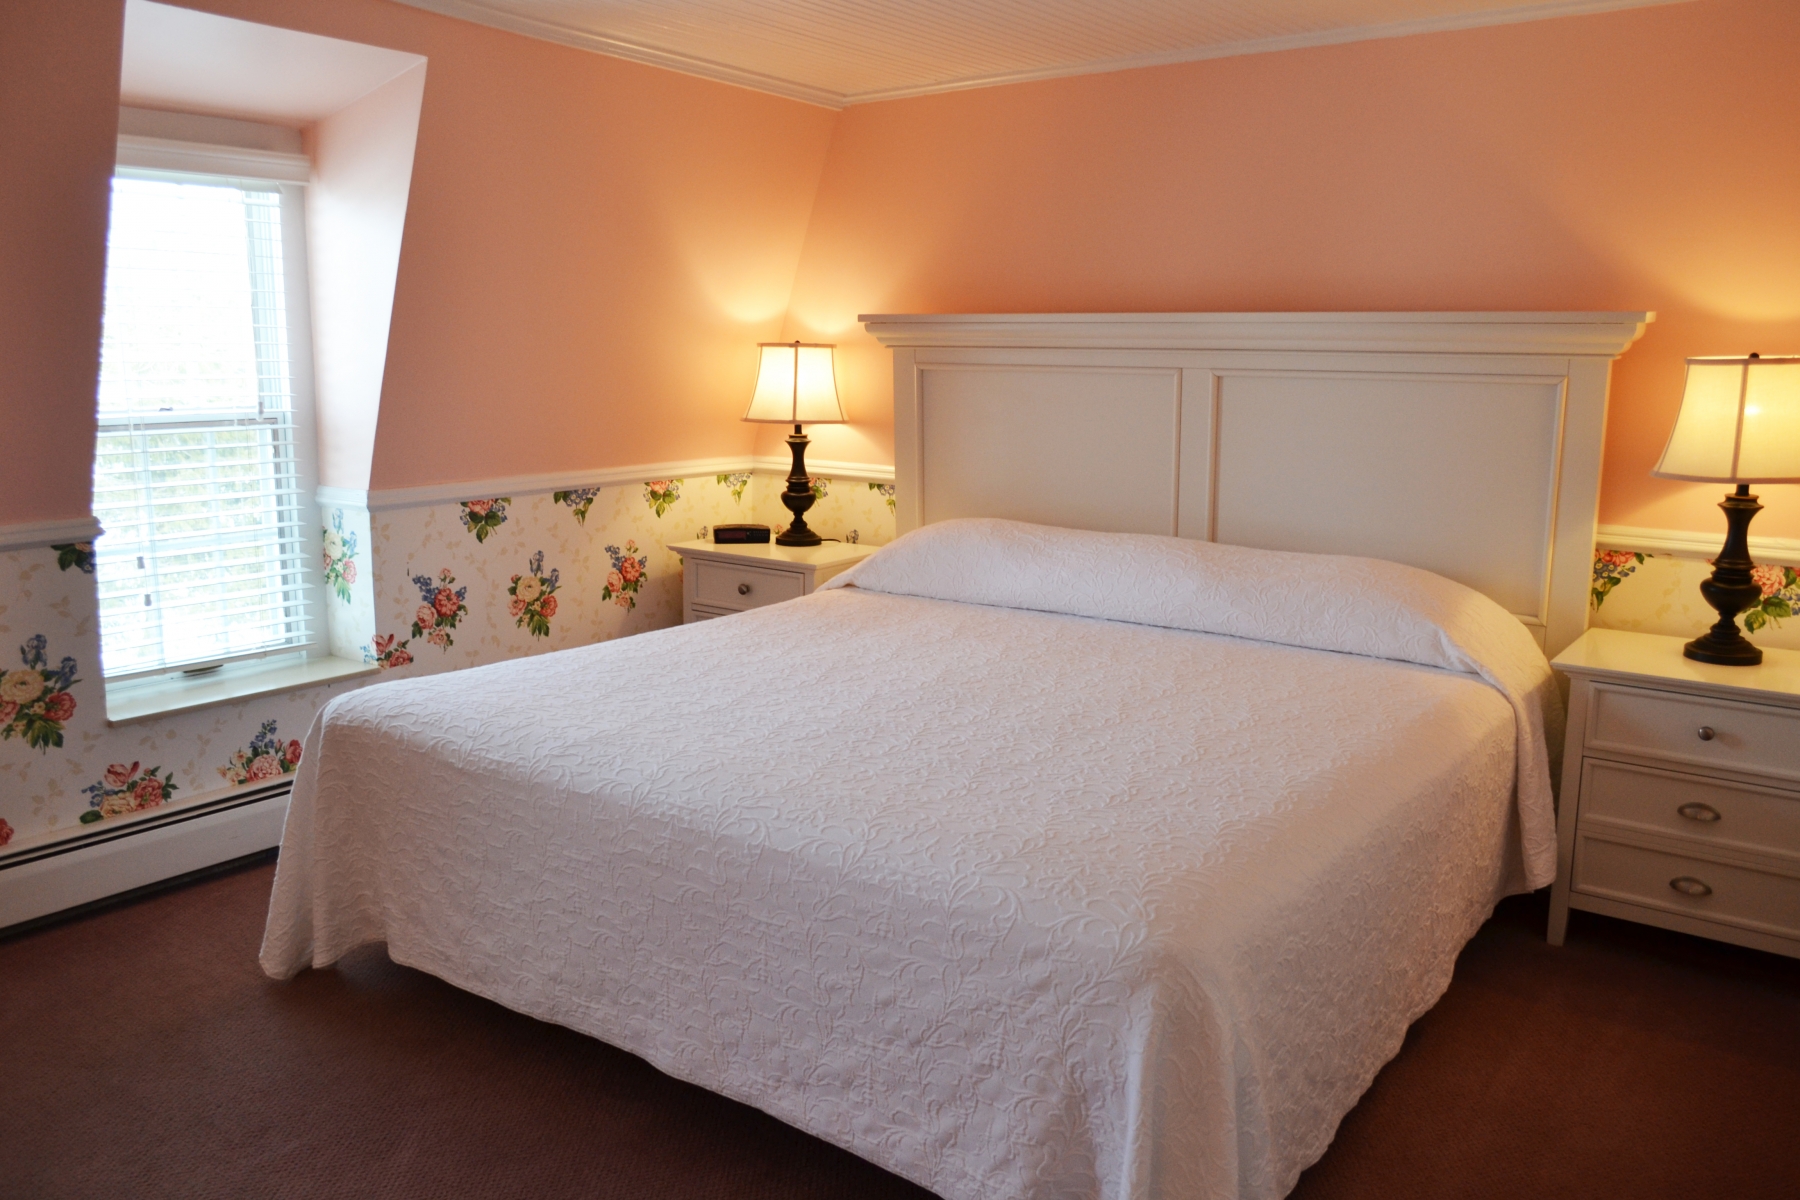 interior room with peach walls and floral wallpaper with a beautiful white king bed in the center of the room  